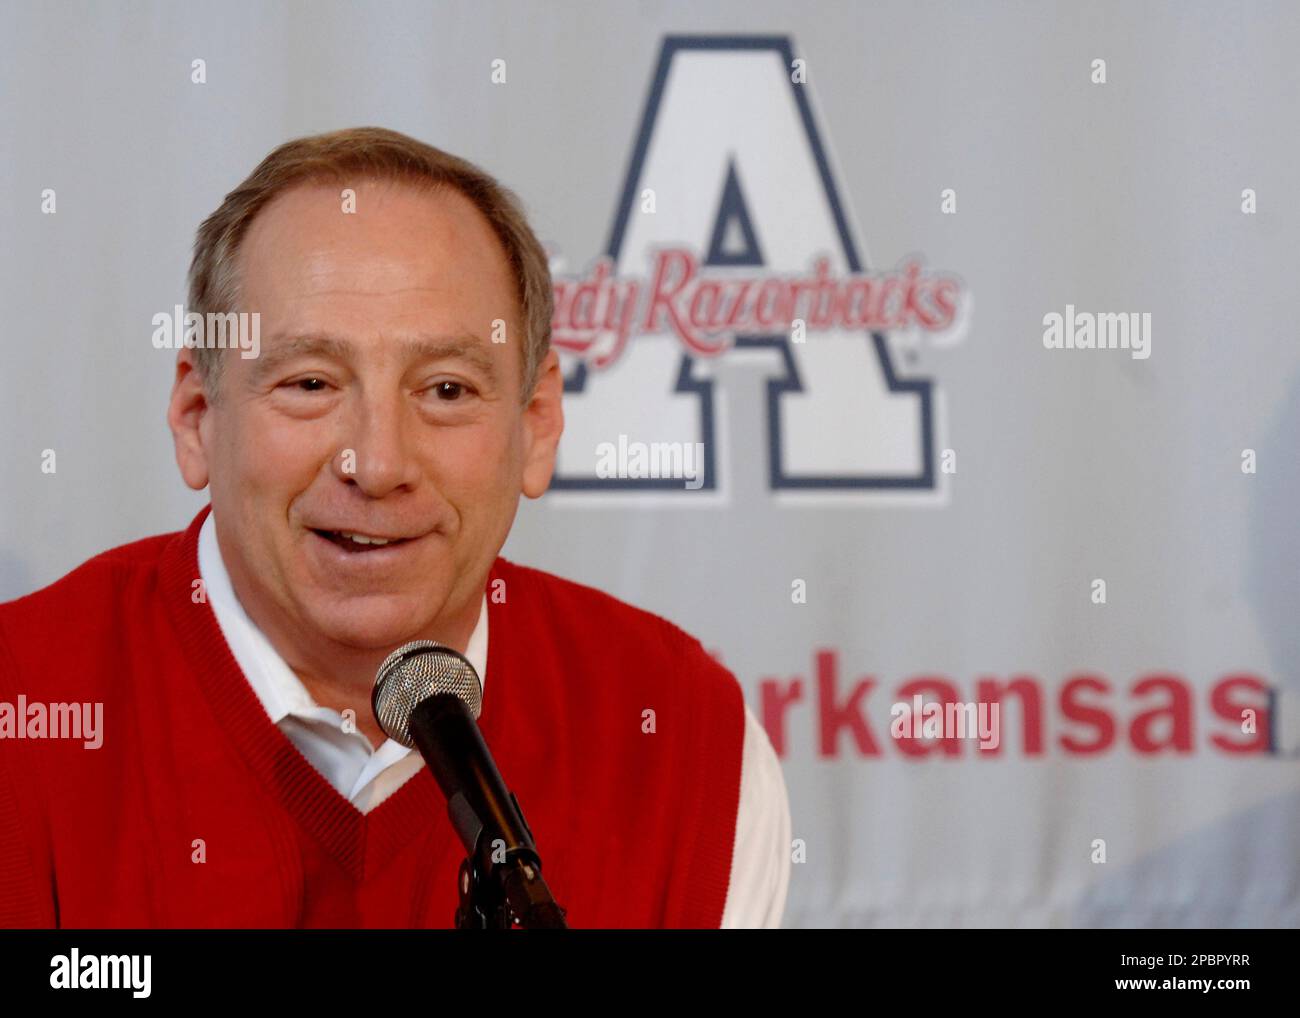 Arkansas women's basketball coach Tom Collen speaks to members of the media  and fans during a news conference Friday, March 23, 2007, in Fayetteville,  Ark., after being named to the position, replacing